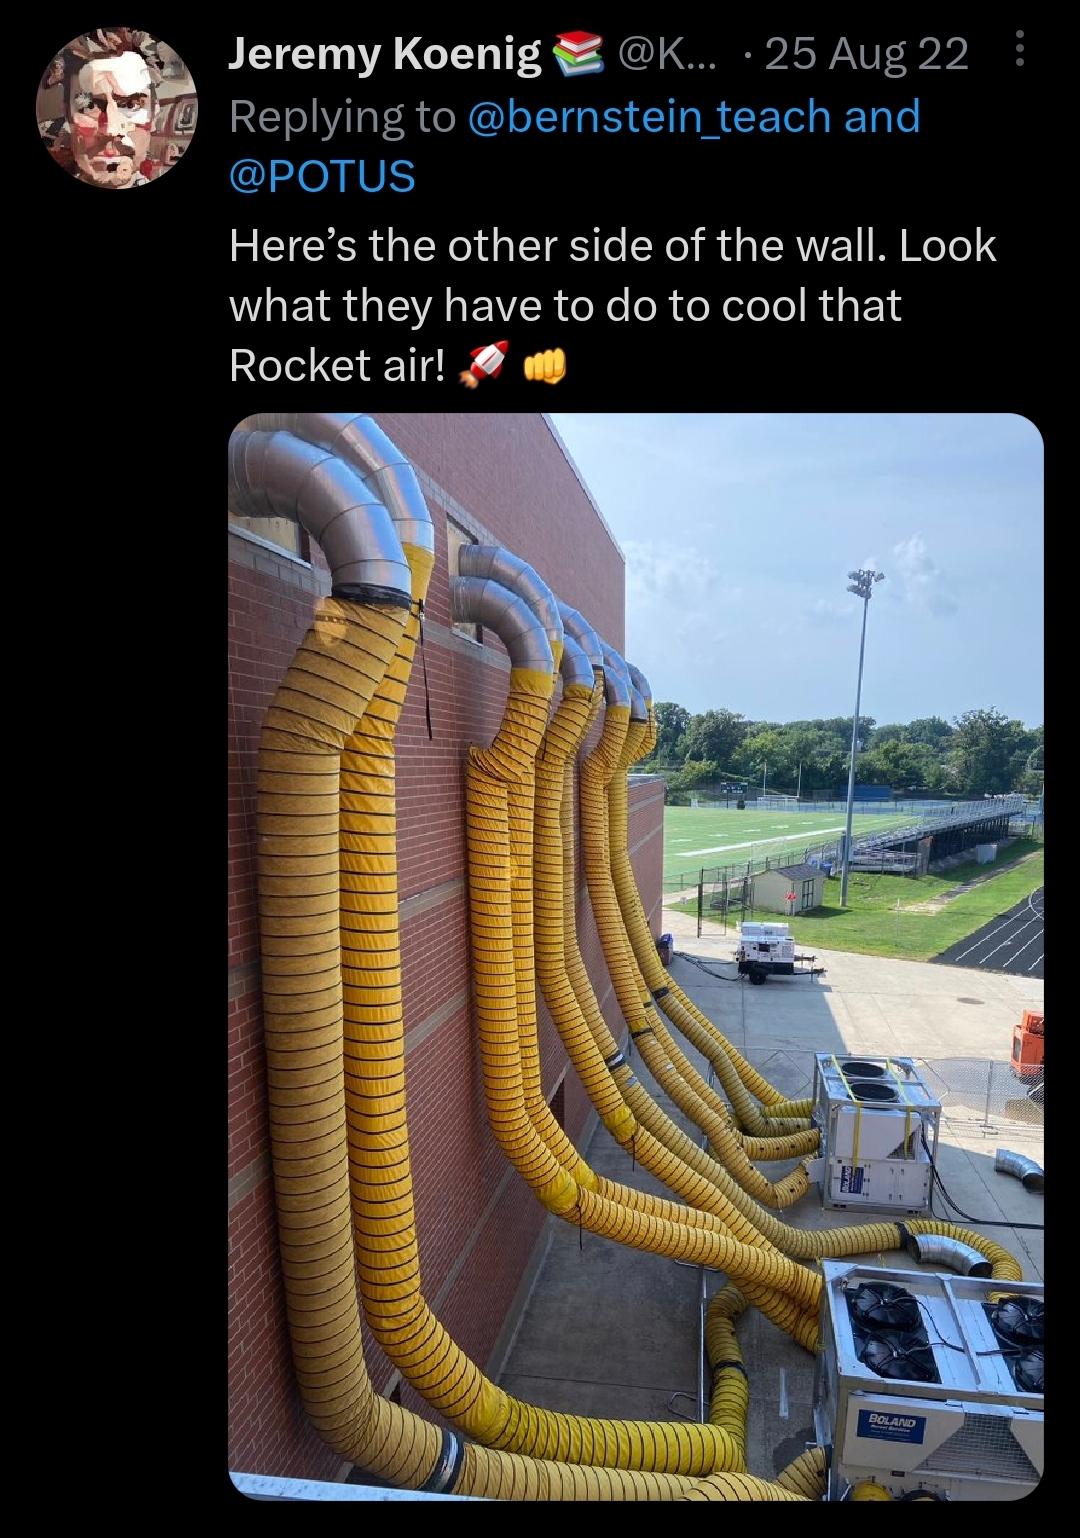 Screenshot of a tweet from Jeremy Koenig dated 25 Aug 22. Caption reads '@bernstein_teach and @POTUS Here's the other side of the wall. Look what they have to do to cool that Rocket air 🚀👊'. The photo shows the outside wall of a high school gymnasium whose windows have been removed and fitted with some large air ducts connected to a high-end AC/ventilation setup